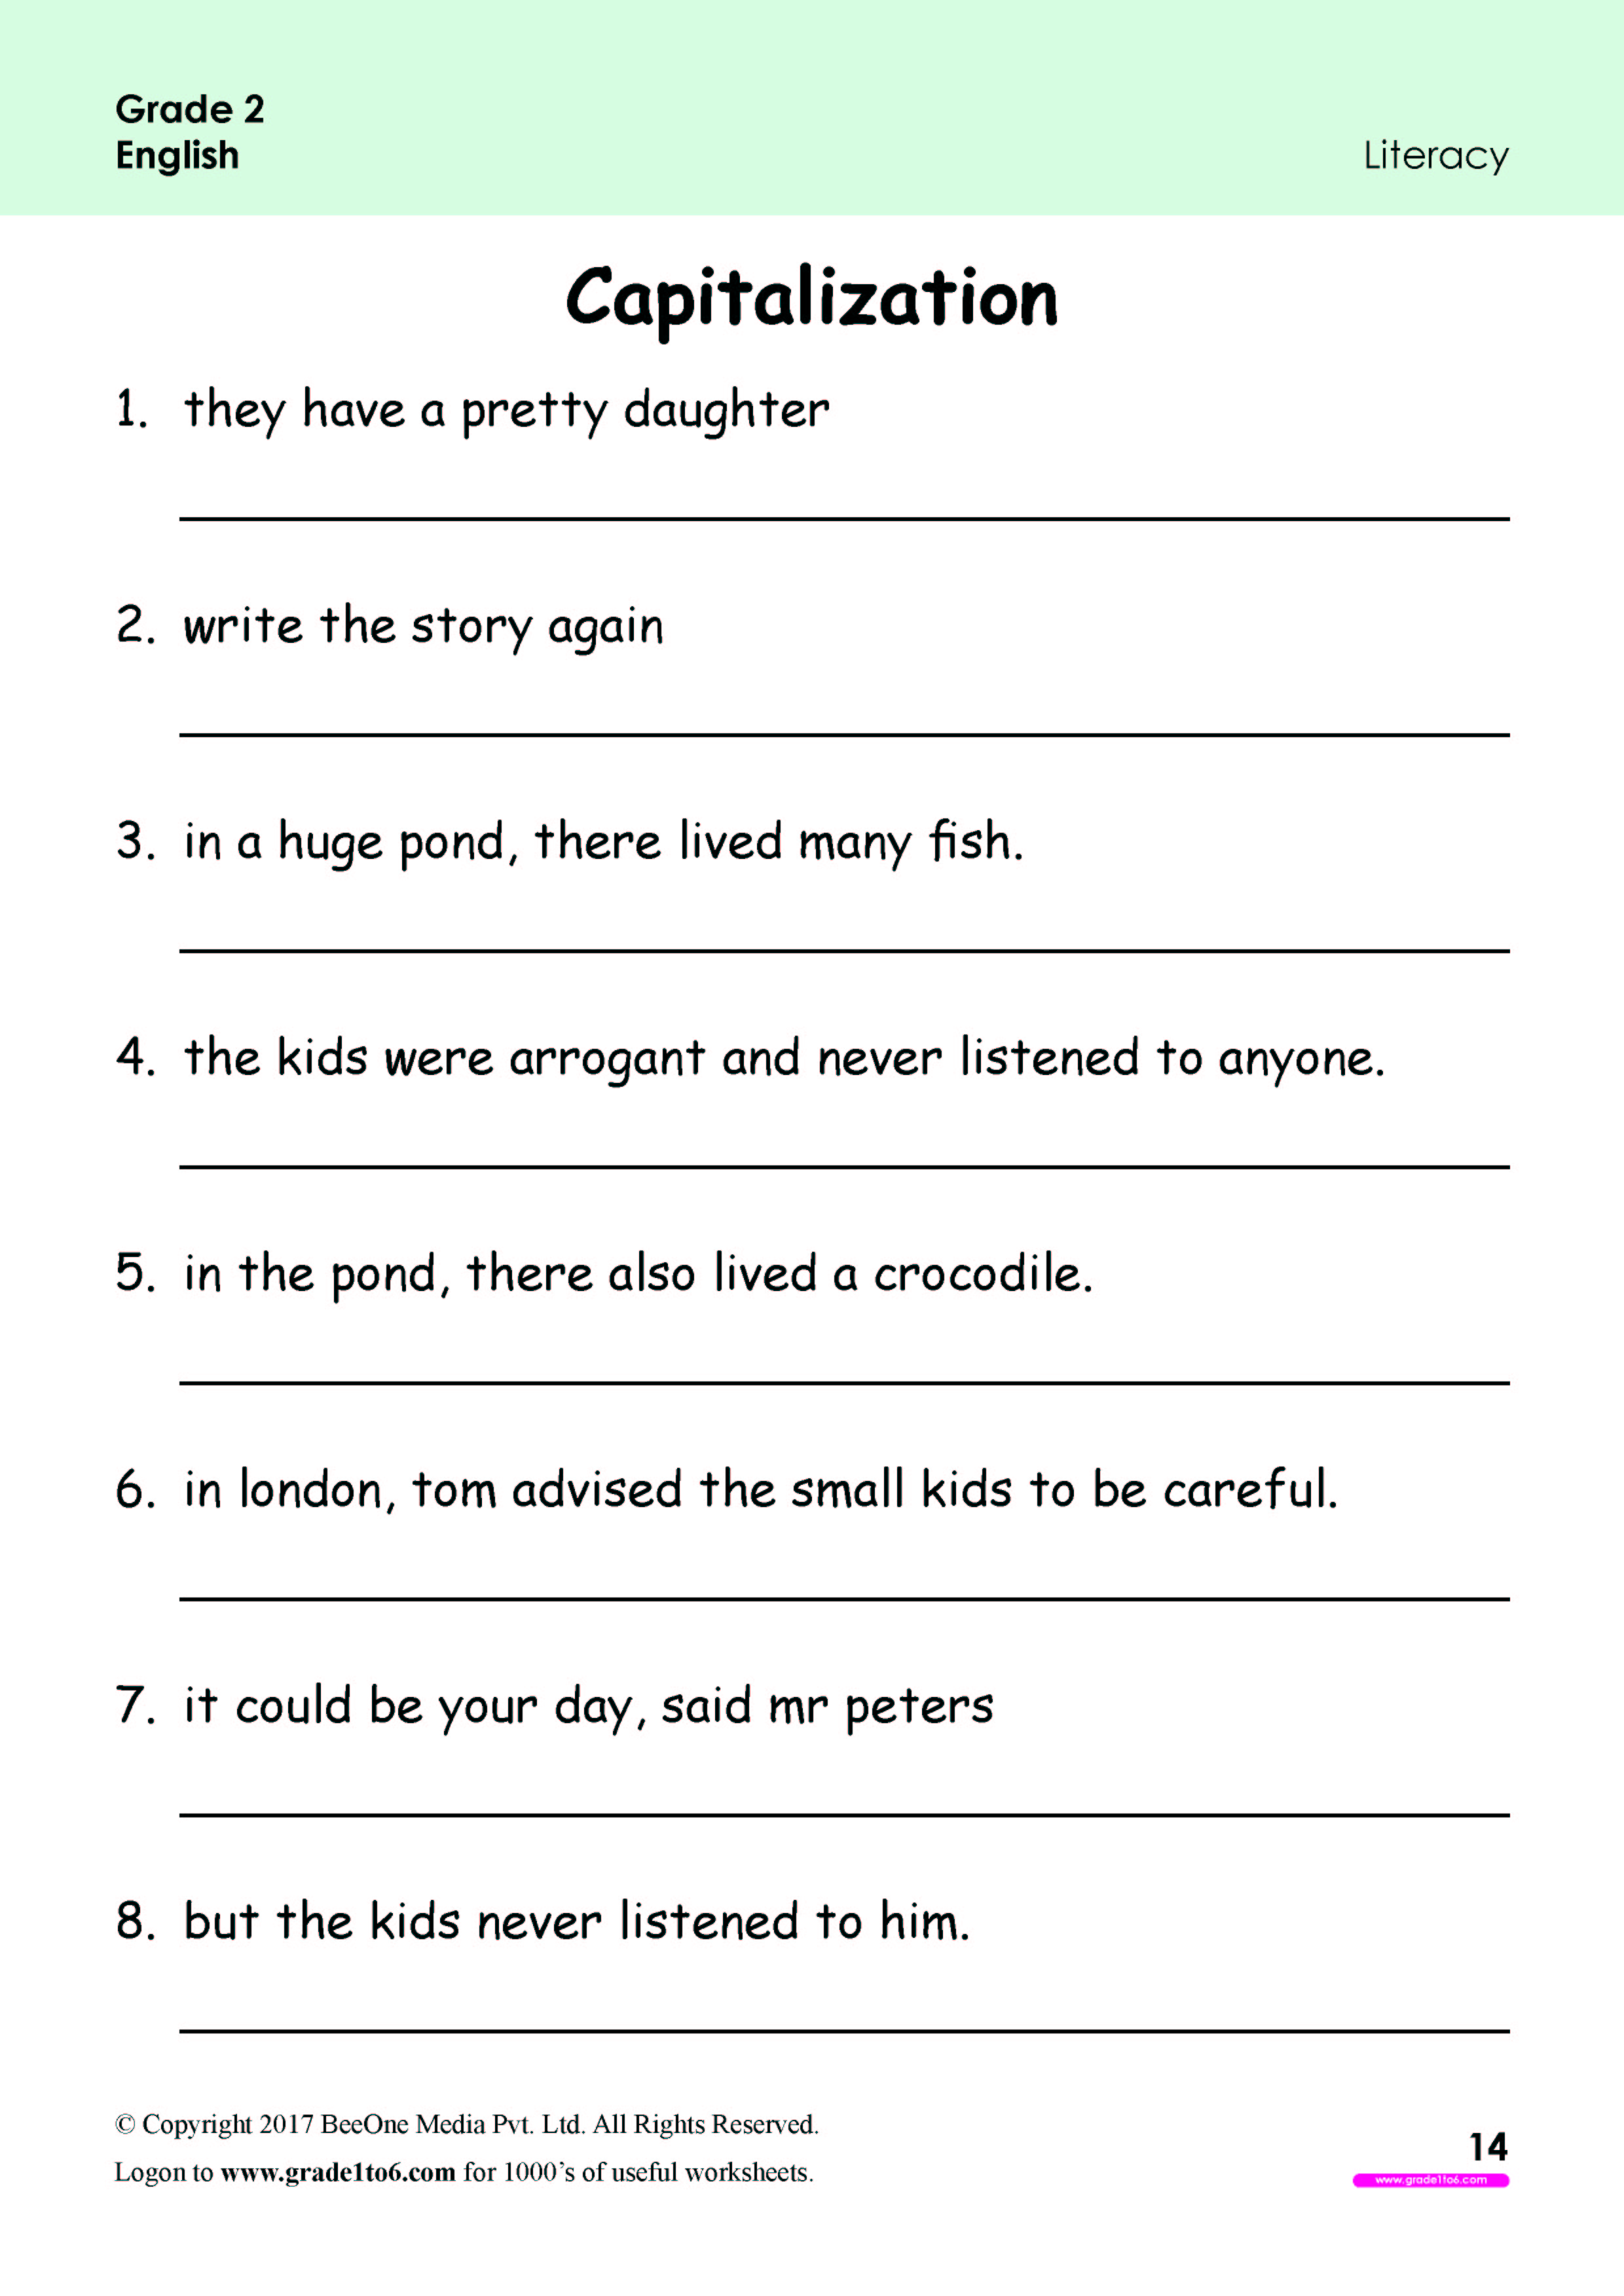 k5-learning-english-worksheets-for-grade-2-little94comei